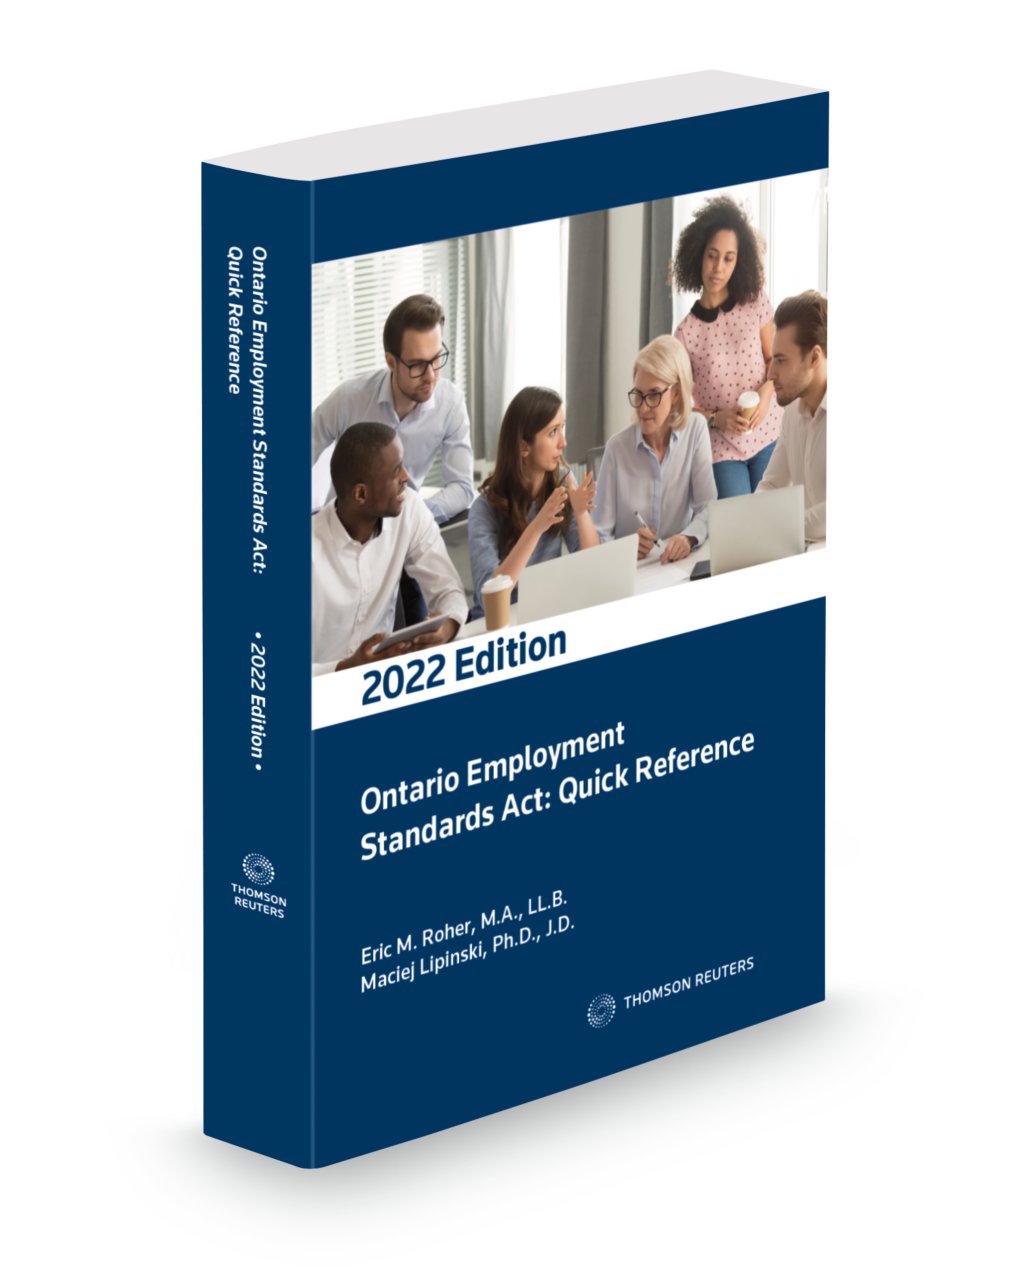 Ontario Employment Standards Act Quick Reference, 2022 Edition